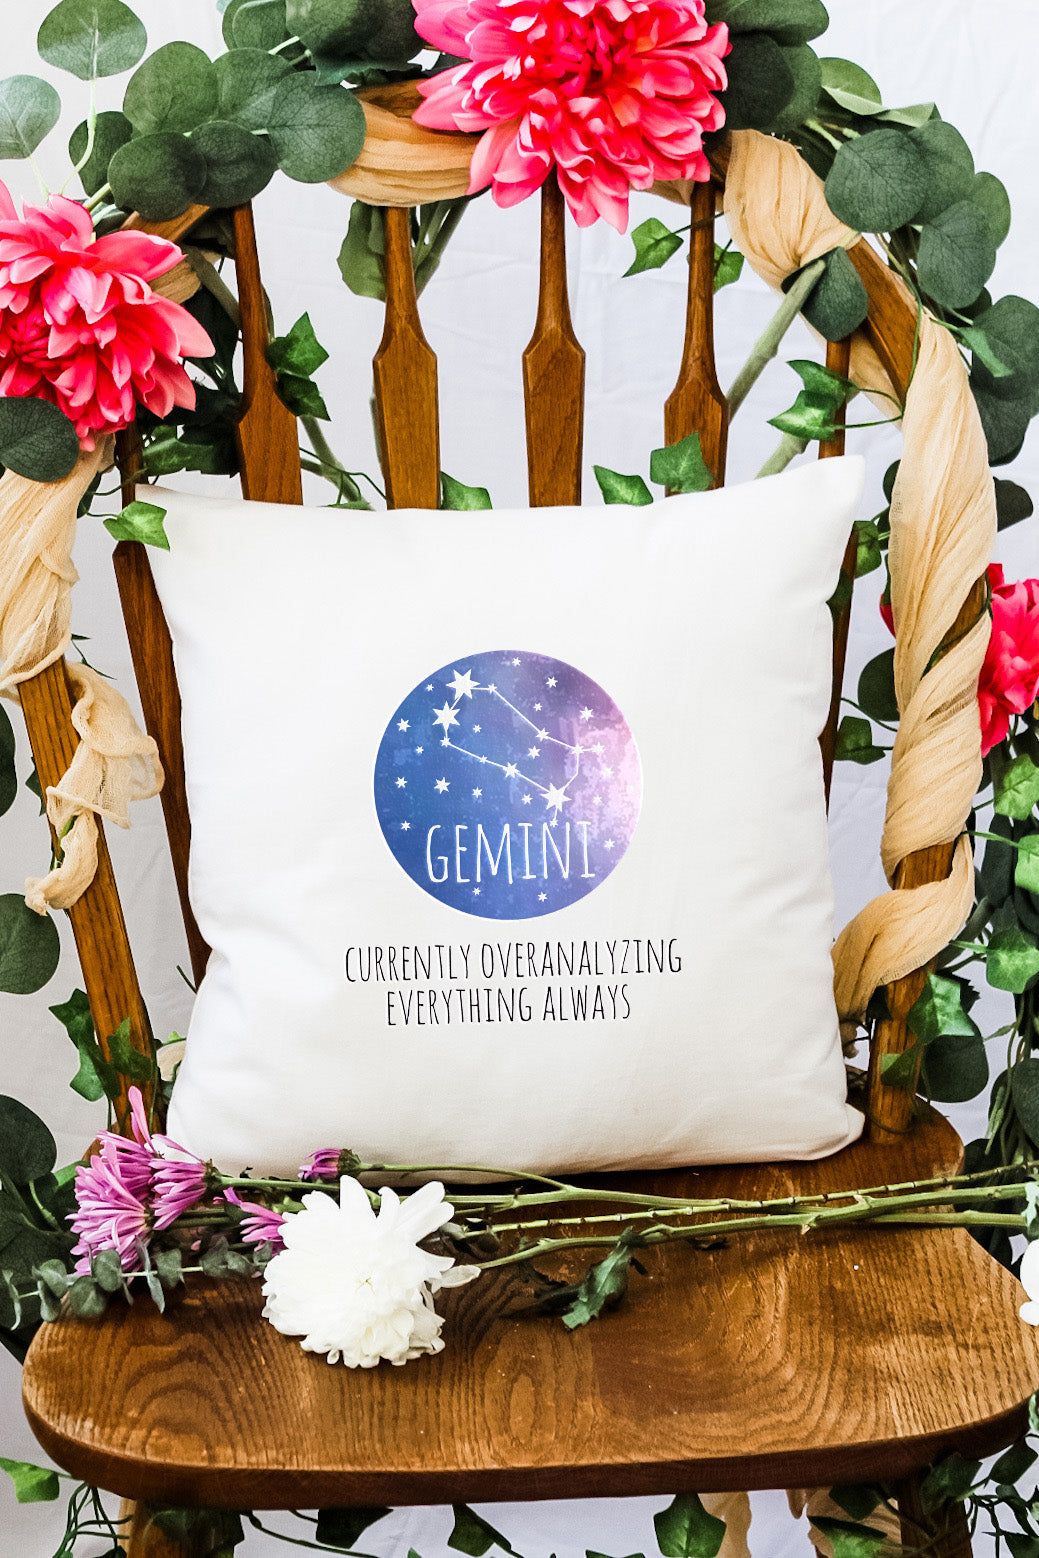 Gemini (Currently Overanalyzing Everything) - Decorative Throw Pillow - MoonlightMakers